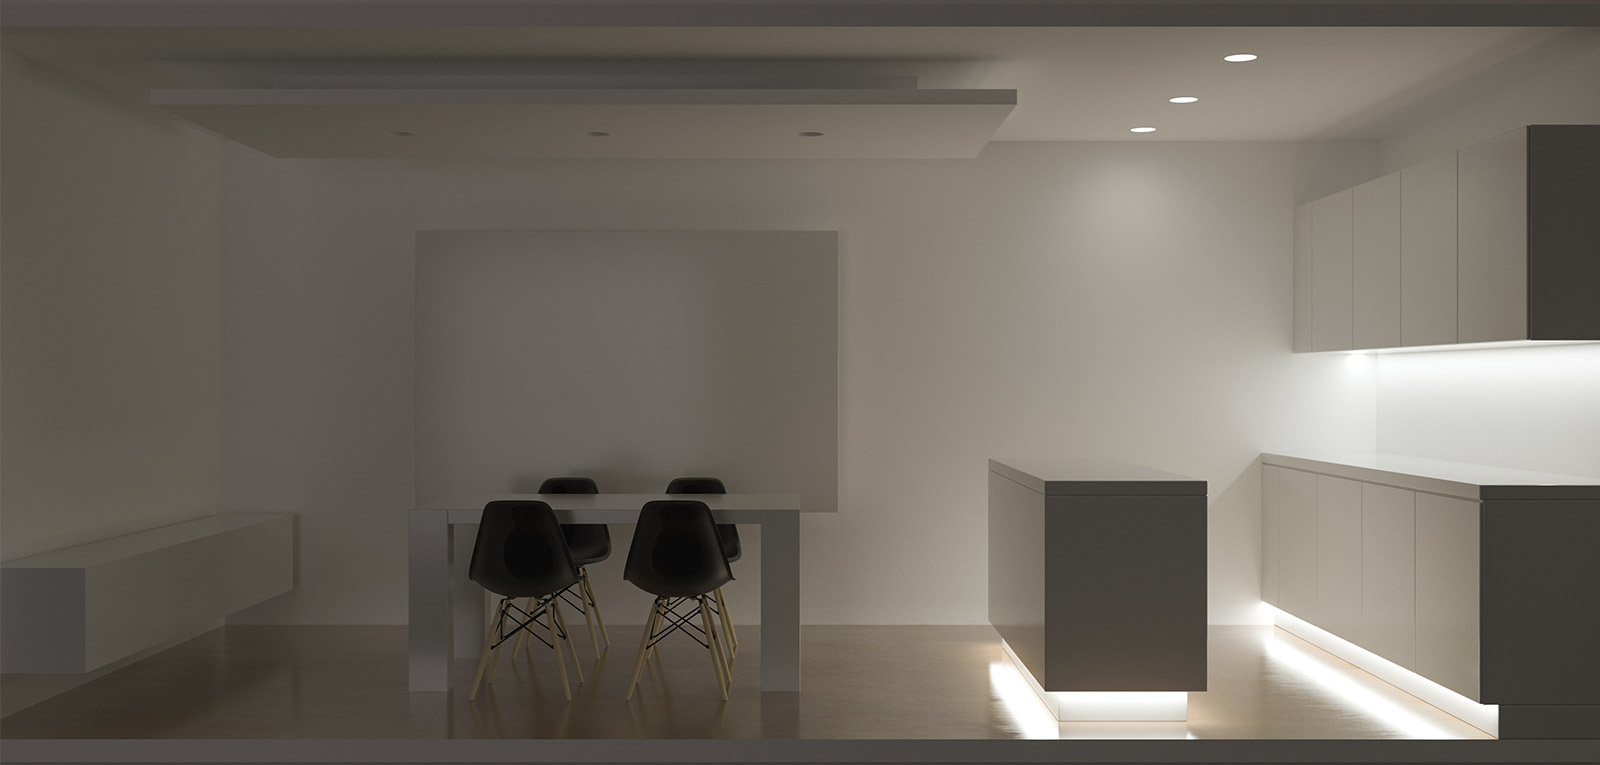 Loox 5 from Häfele. The LED lighting system for furniture and space.